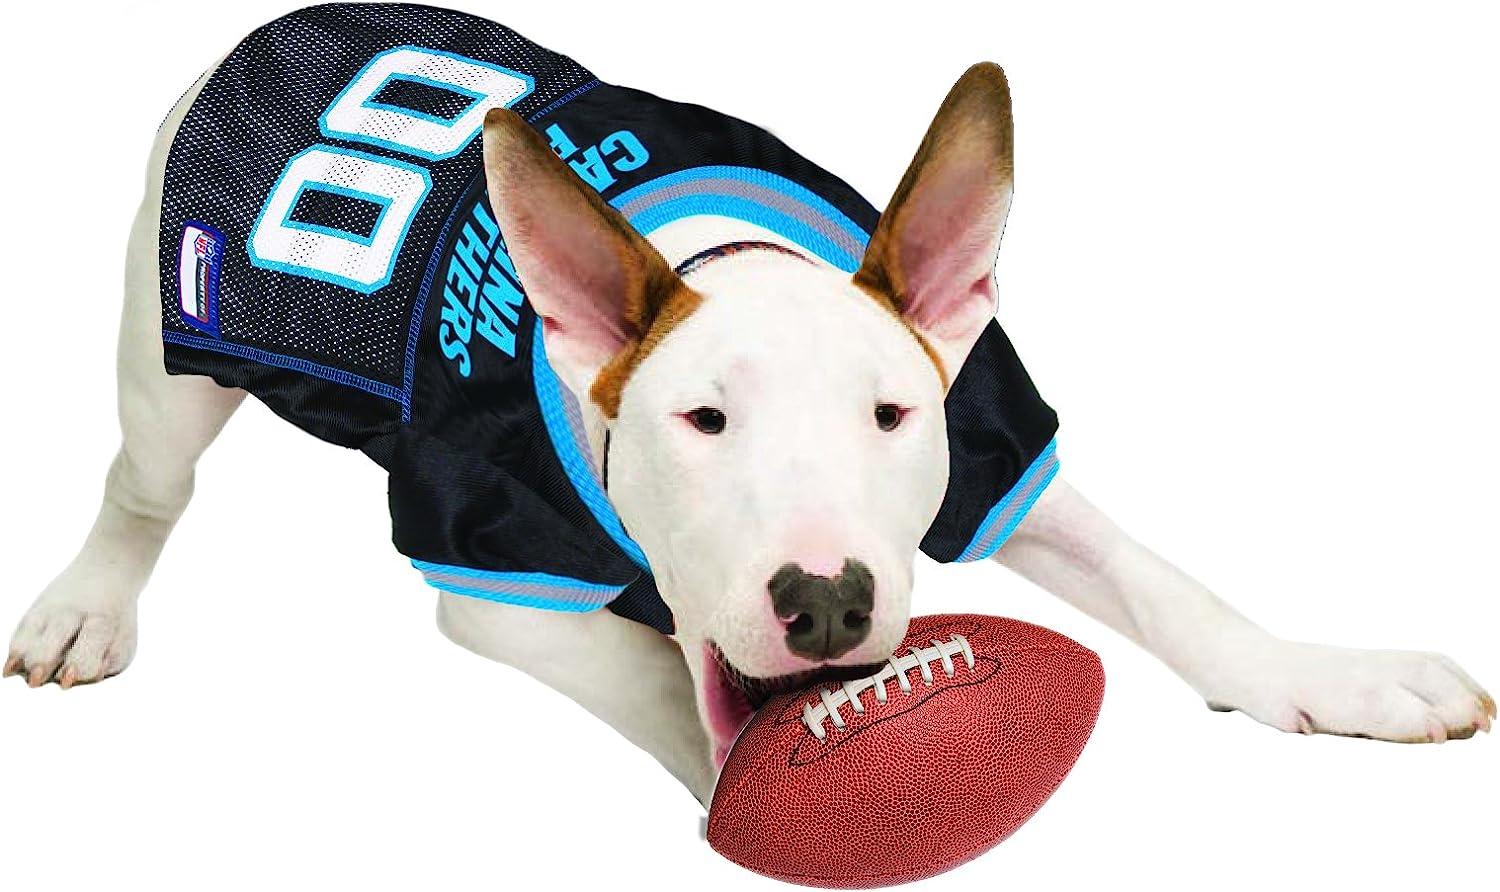 carolina panthers jersey for dogs